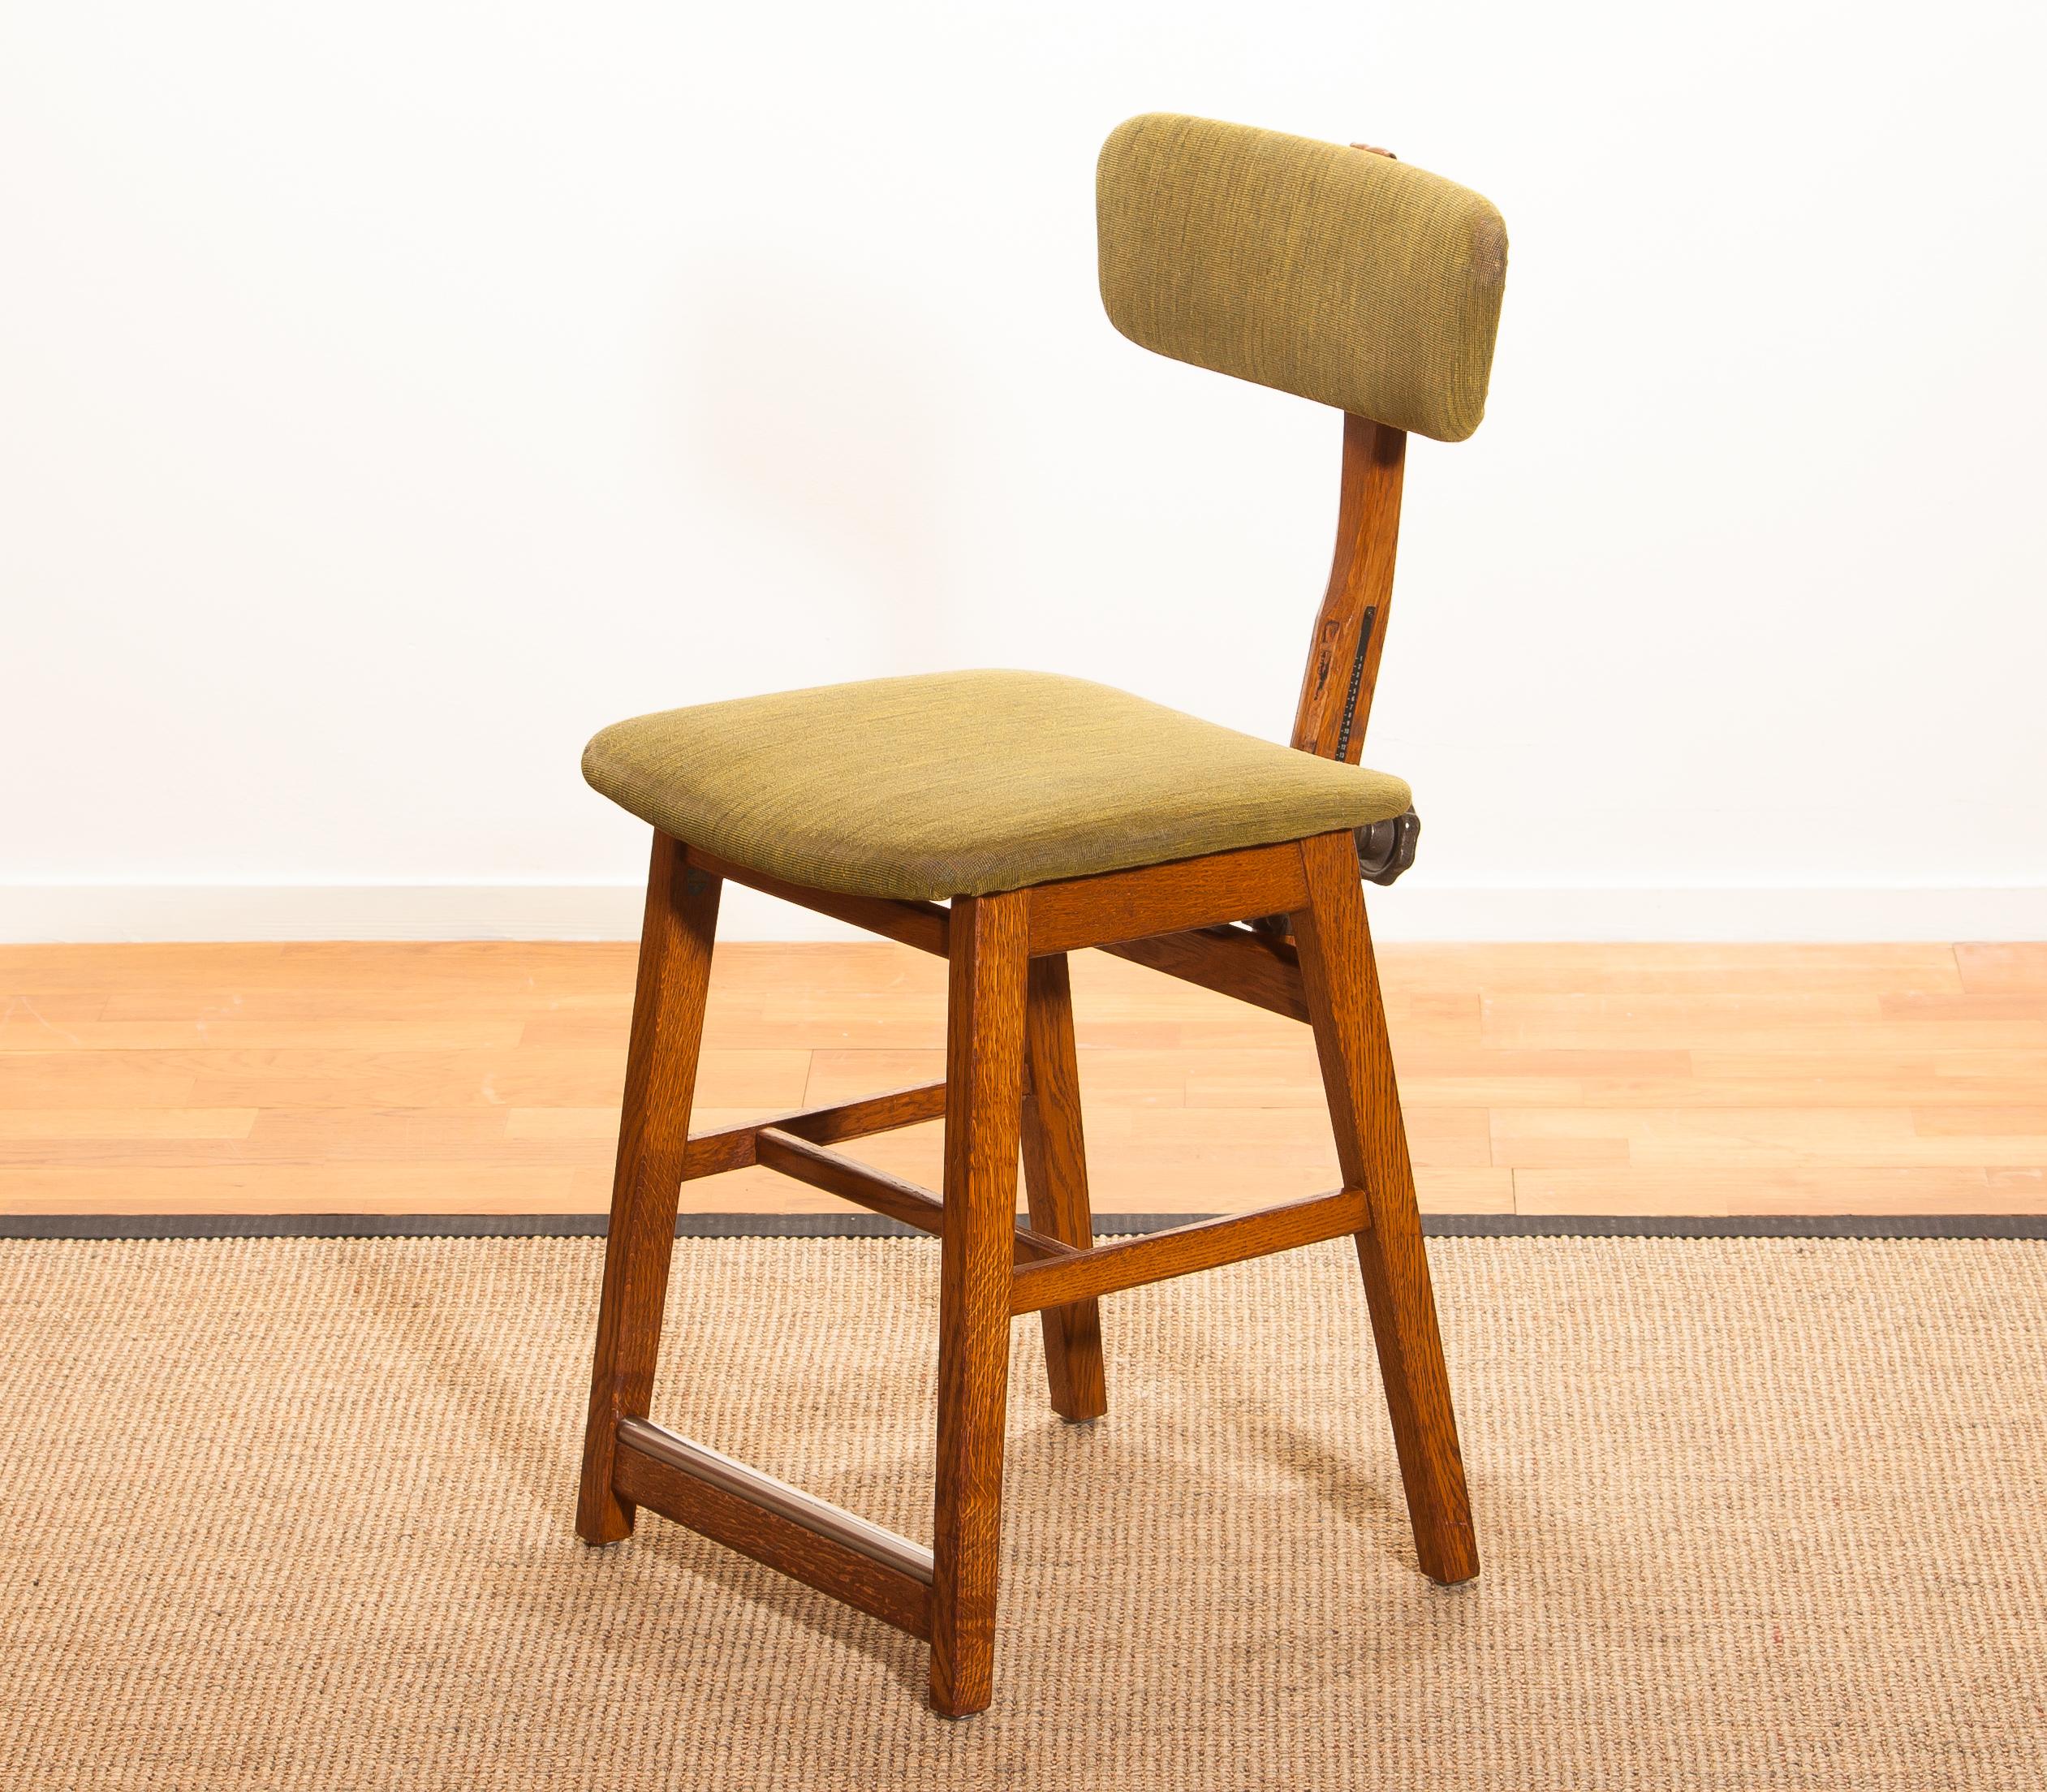 1960s, Teak and Wool Desk Chair by Âtvidabergs, Sweden 1